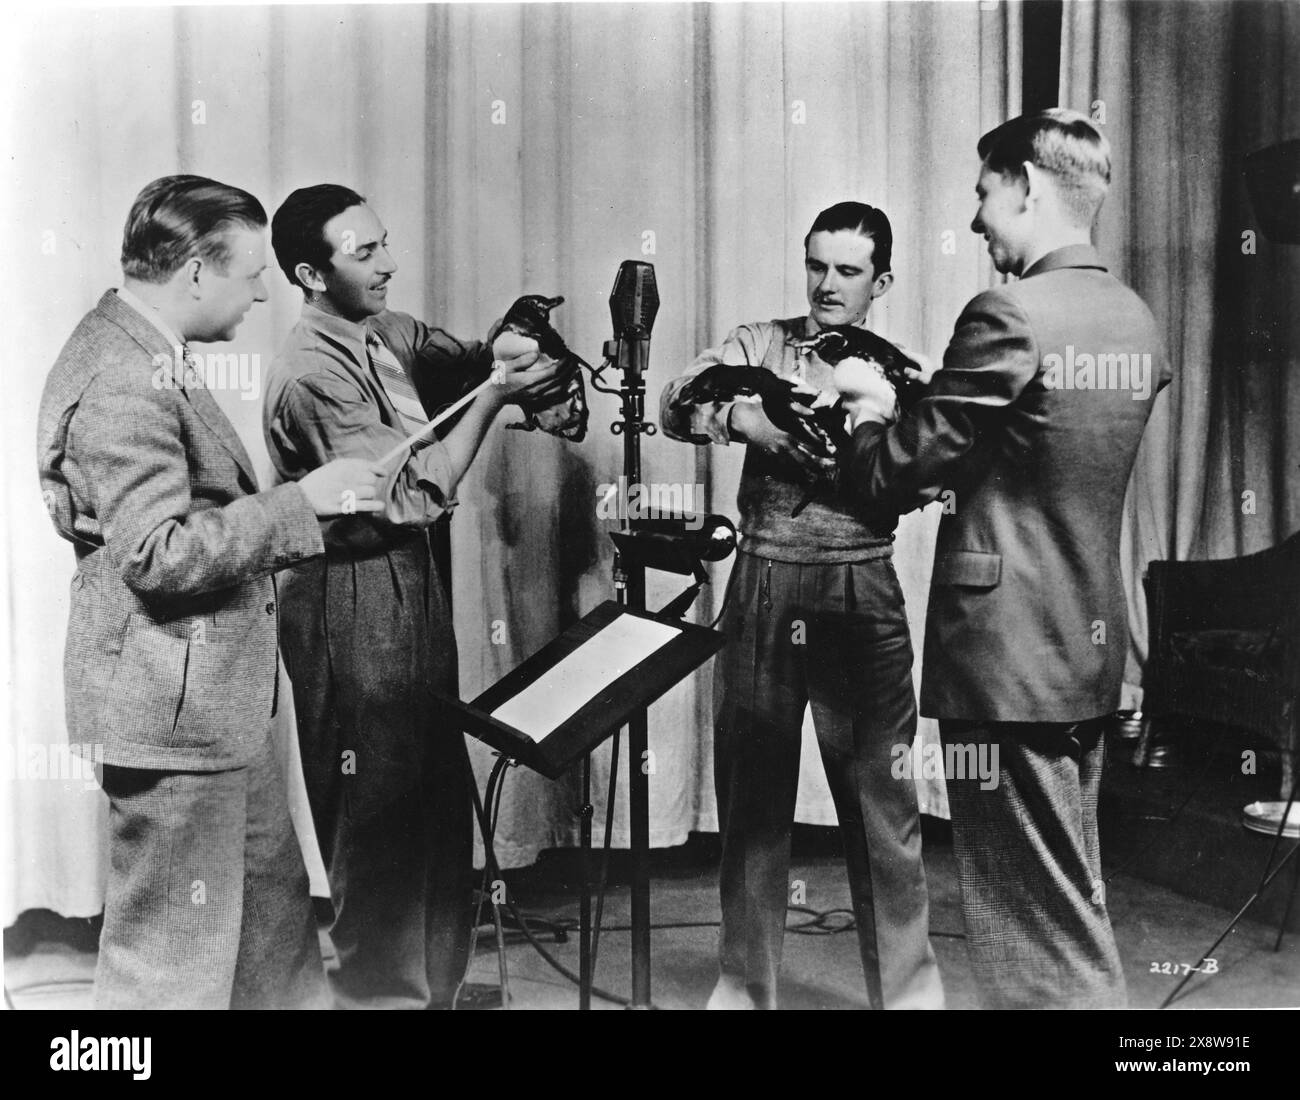 WALT DISNEY and music composer LEIGH HARLINE (on the left) recording the soundtrack for the Silly Symphony PECULIAR PENGUINS 1934 Walt Disney Productions / United Artists Stock Photo